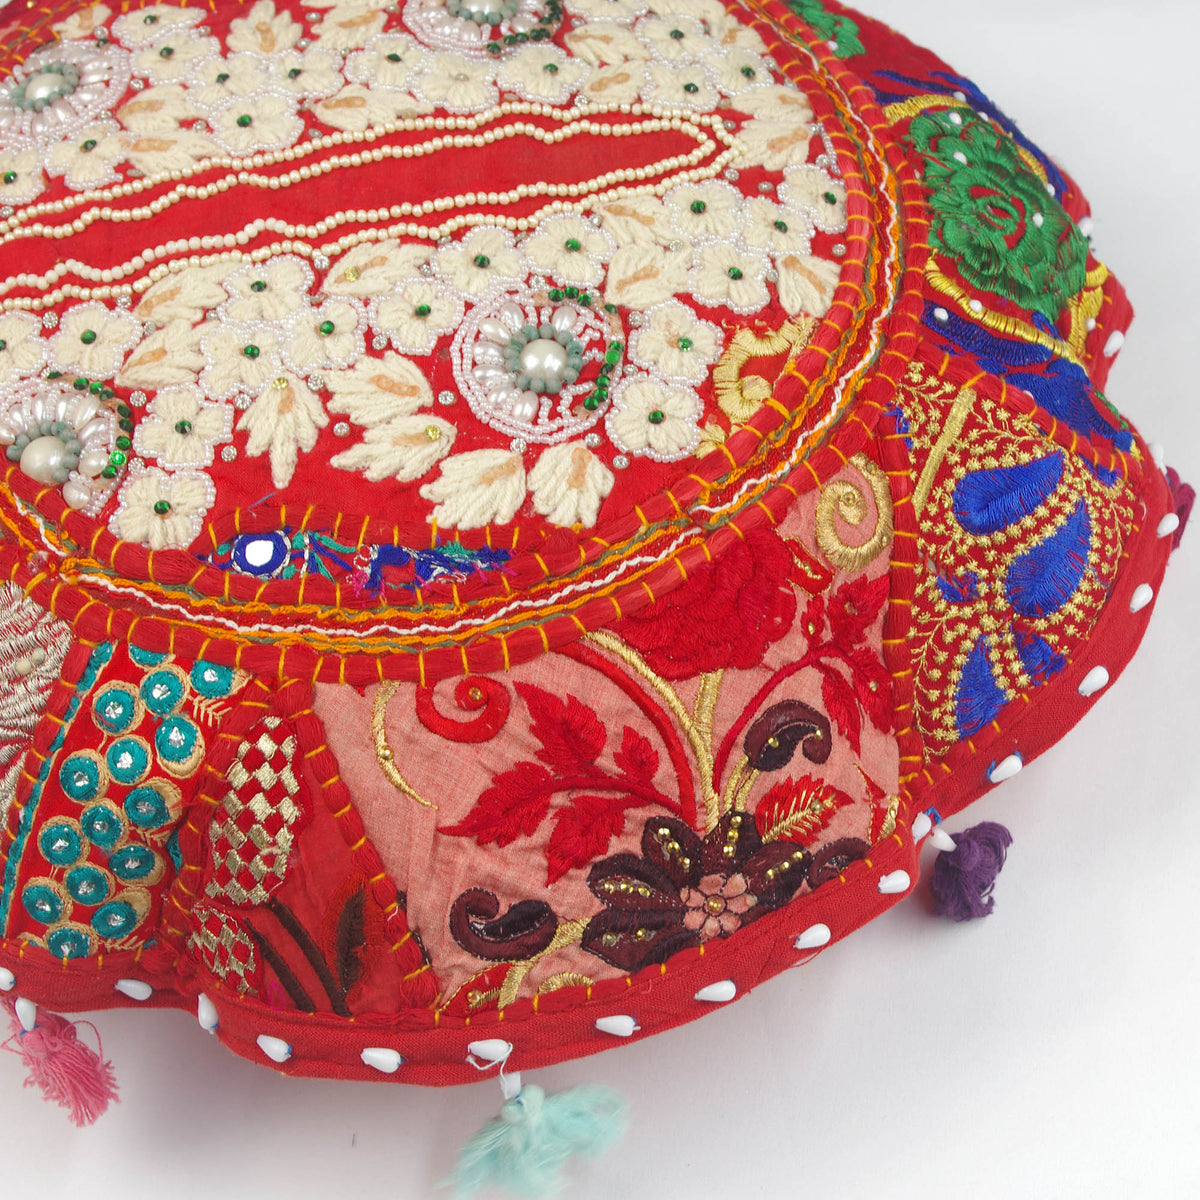 Red & Cream Round Floor Embroidered Patchwork Pouf Ottoman Indian Vintage Cushion Cover 18"